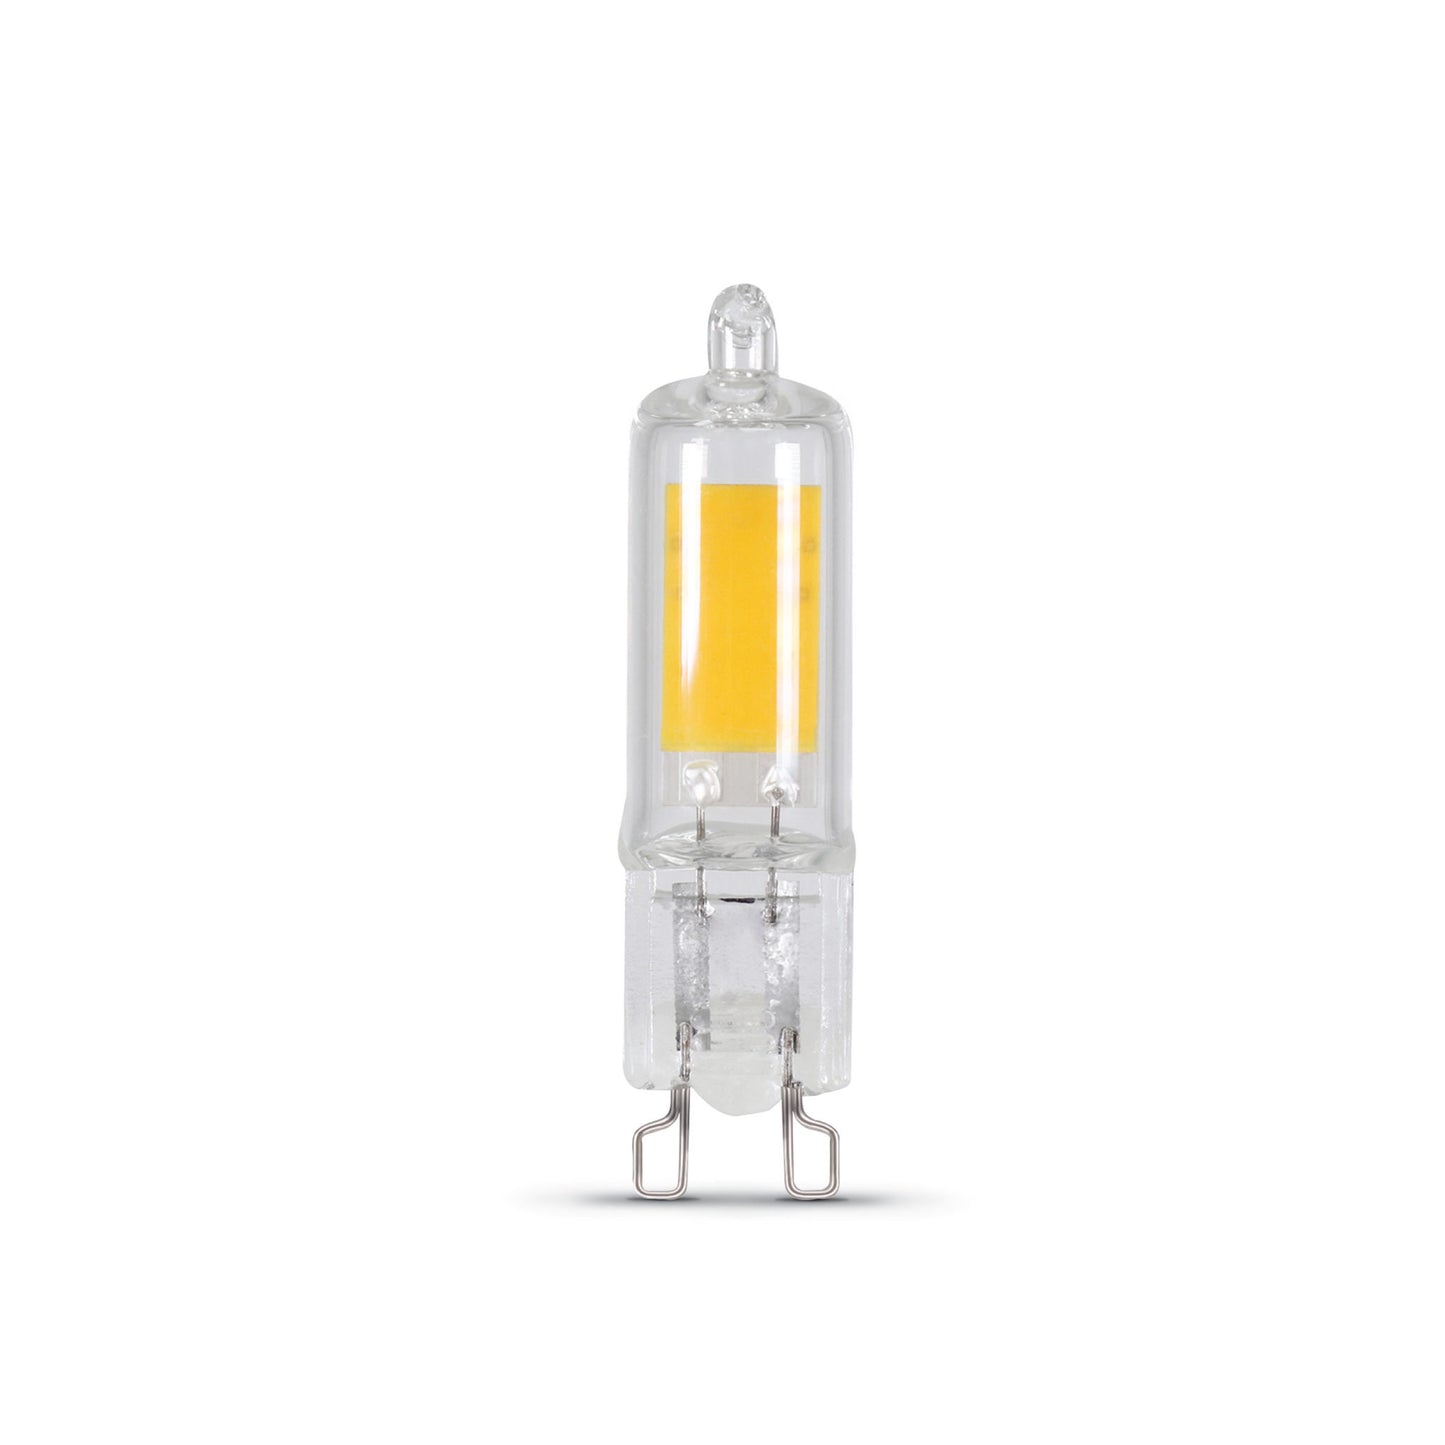 Replacement for Feit G9/LED 160 Lumen 3000K Non-Dimmable LED - NOW BP25G9/830/LED